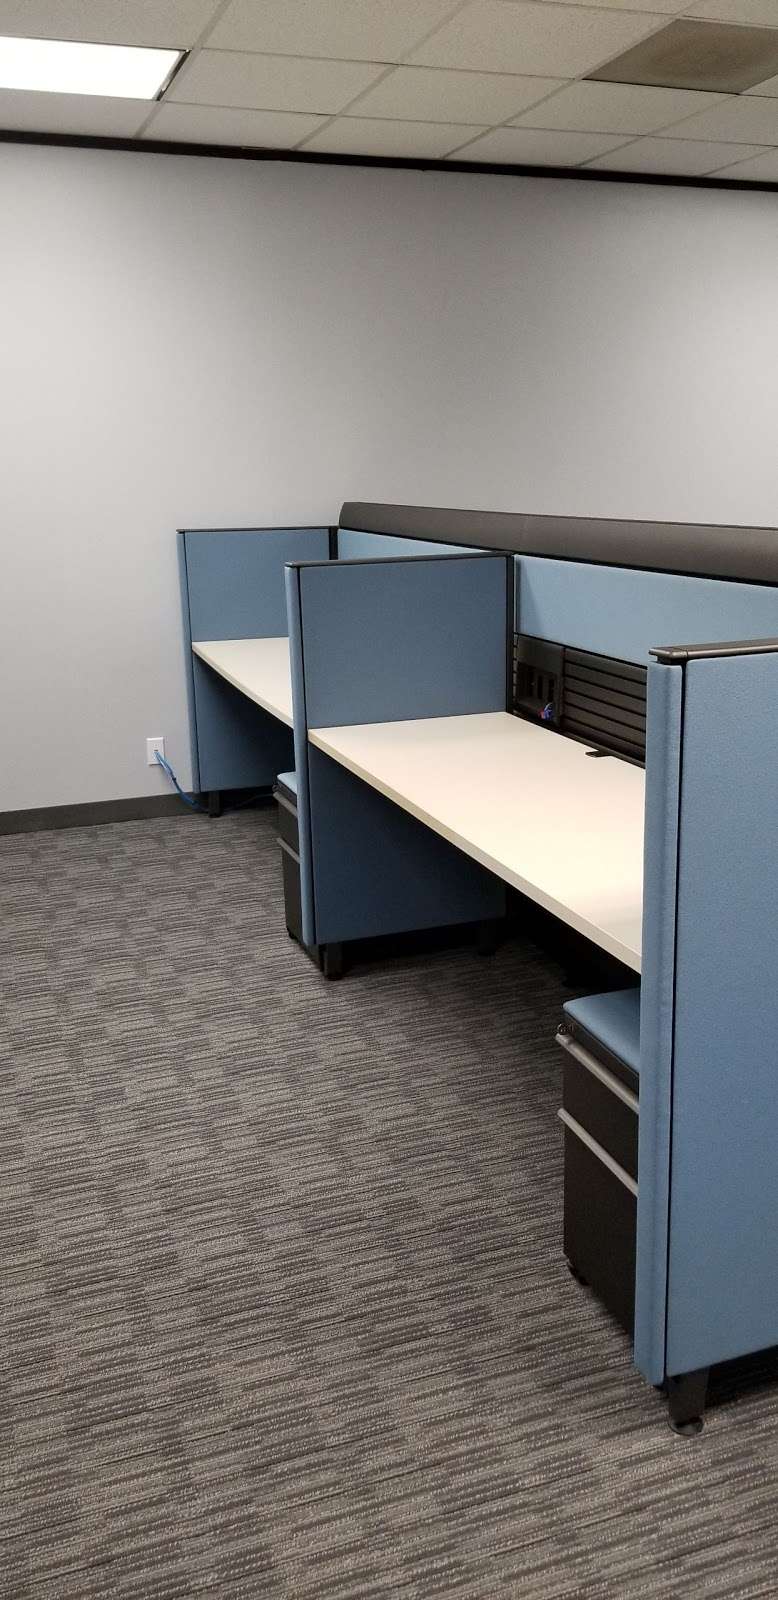 Office Furniture Connection | 13101 Almeda Rd, Houston, TX 77045, USA | Phone: (713) 644-8282